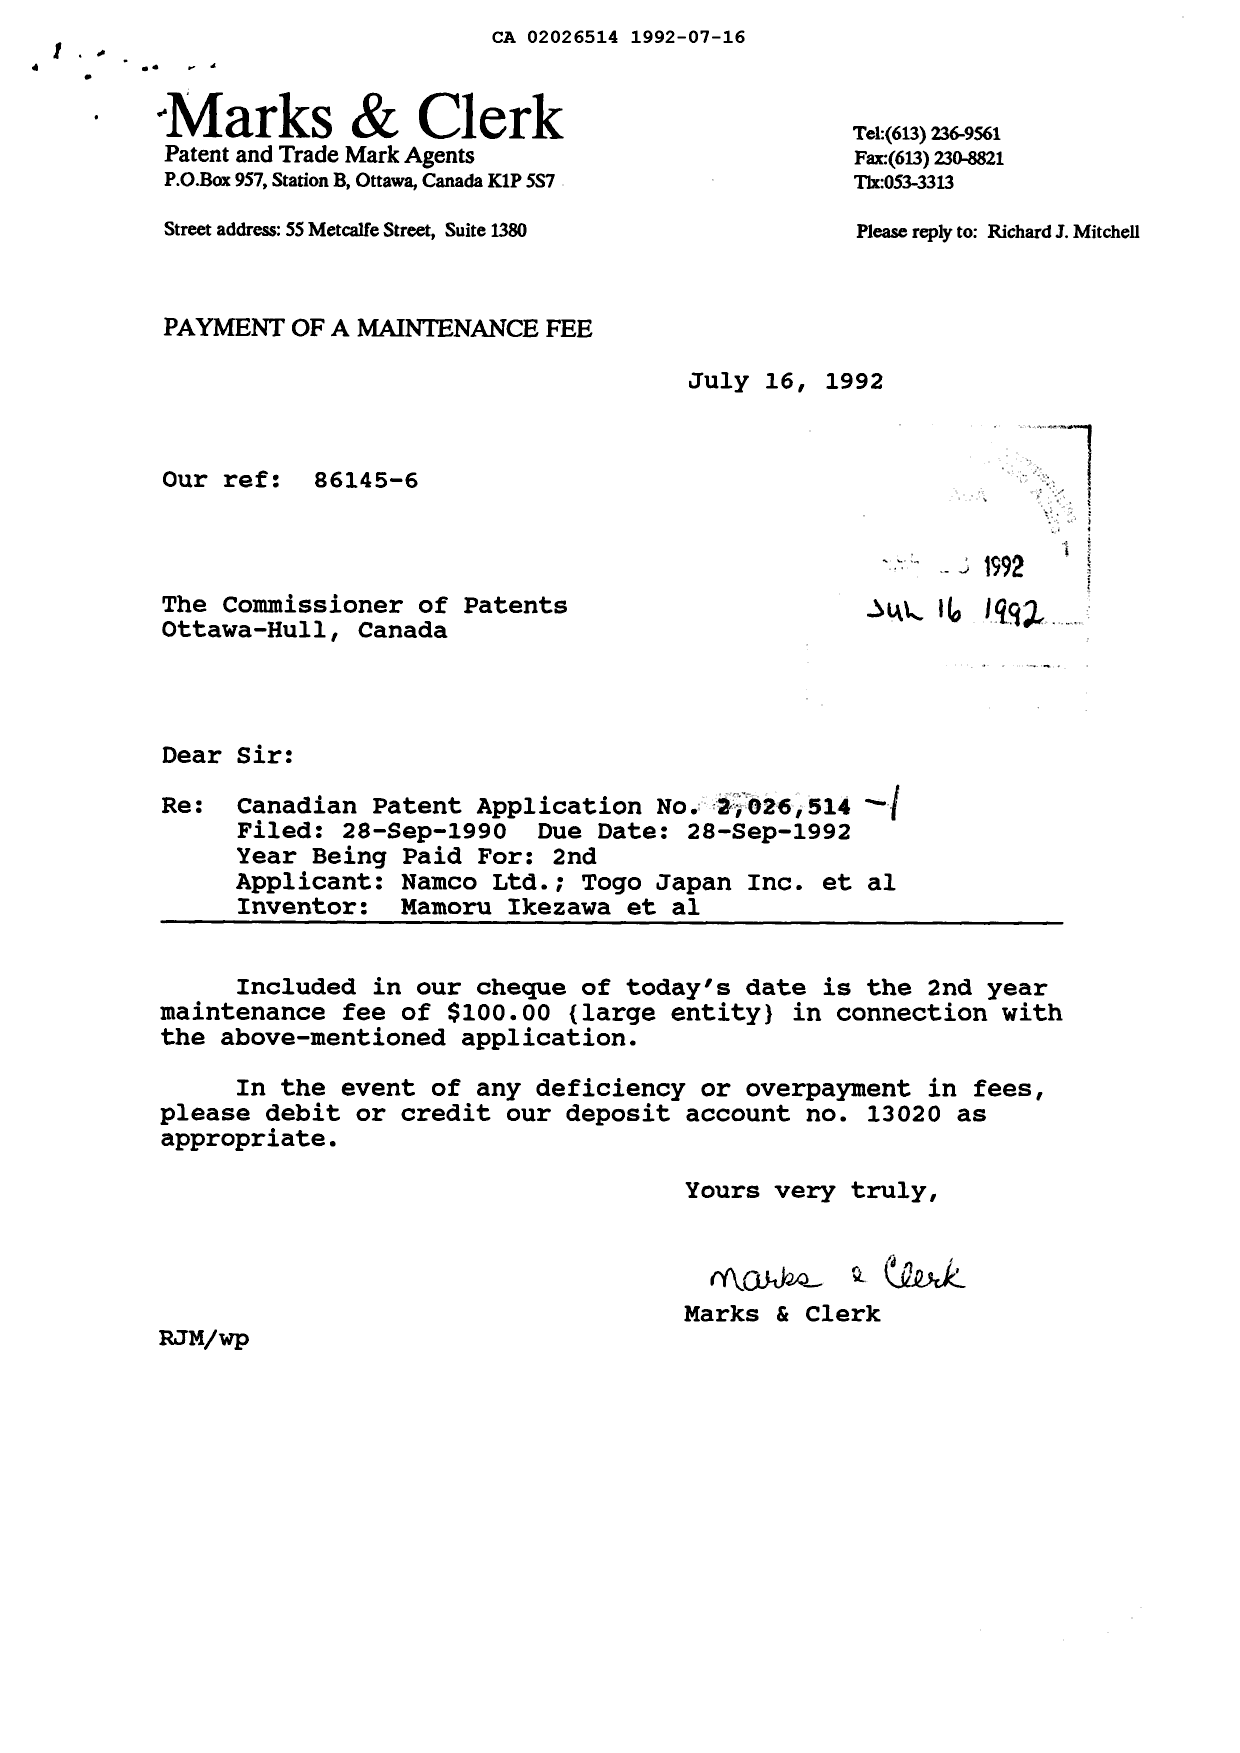 Canadian Patent Document 2026514. Fees 19920716. Image 1 of 1